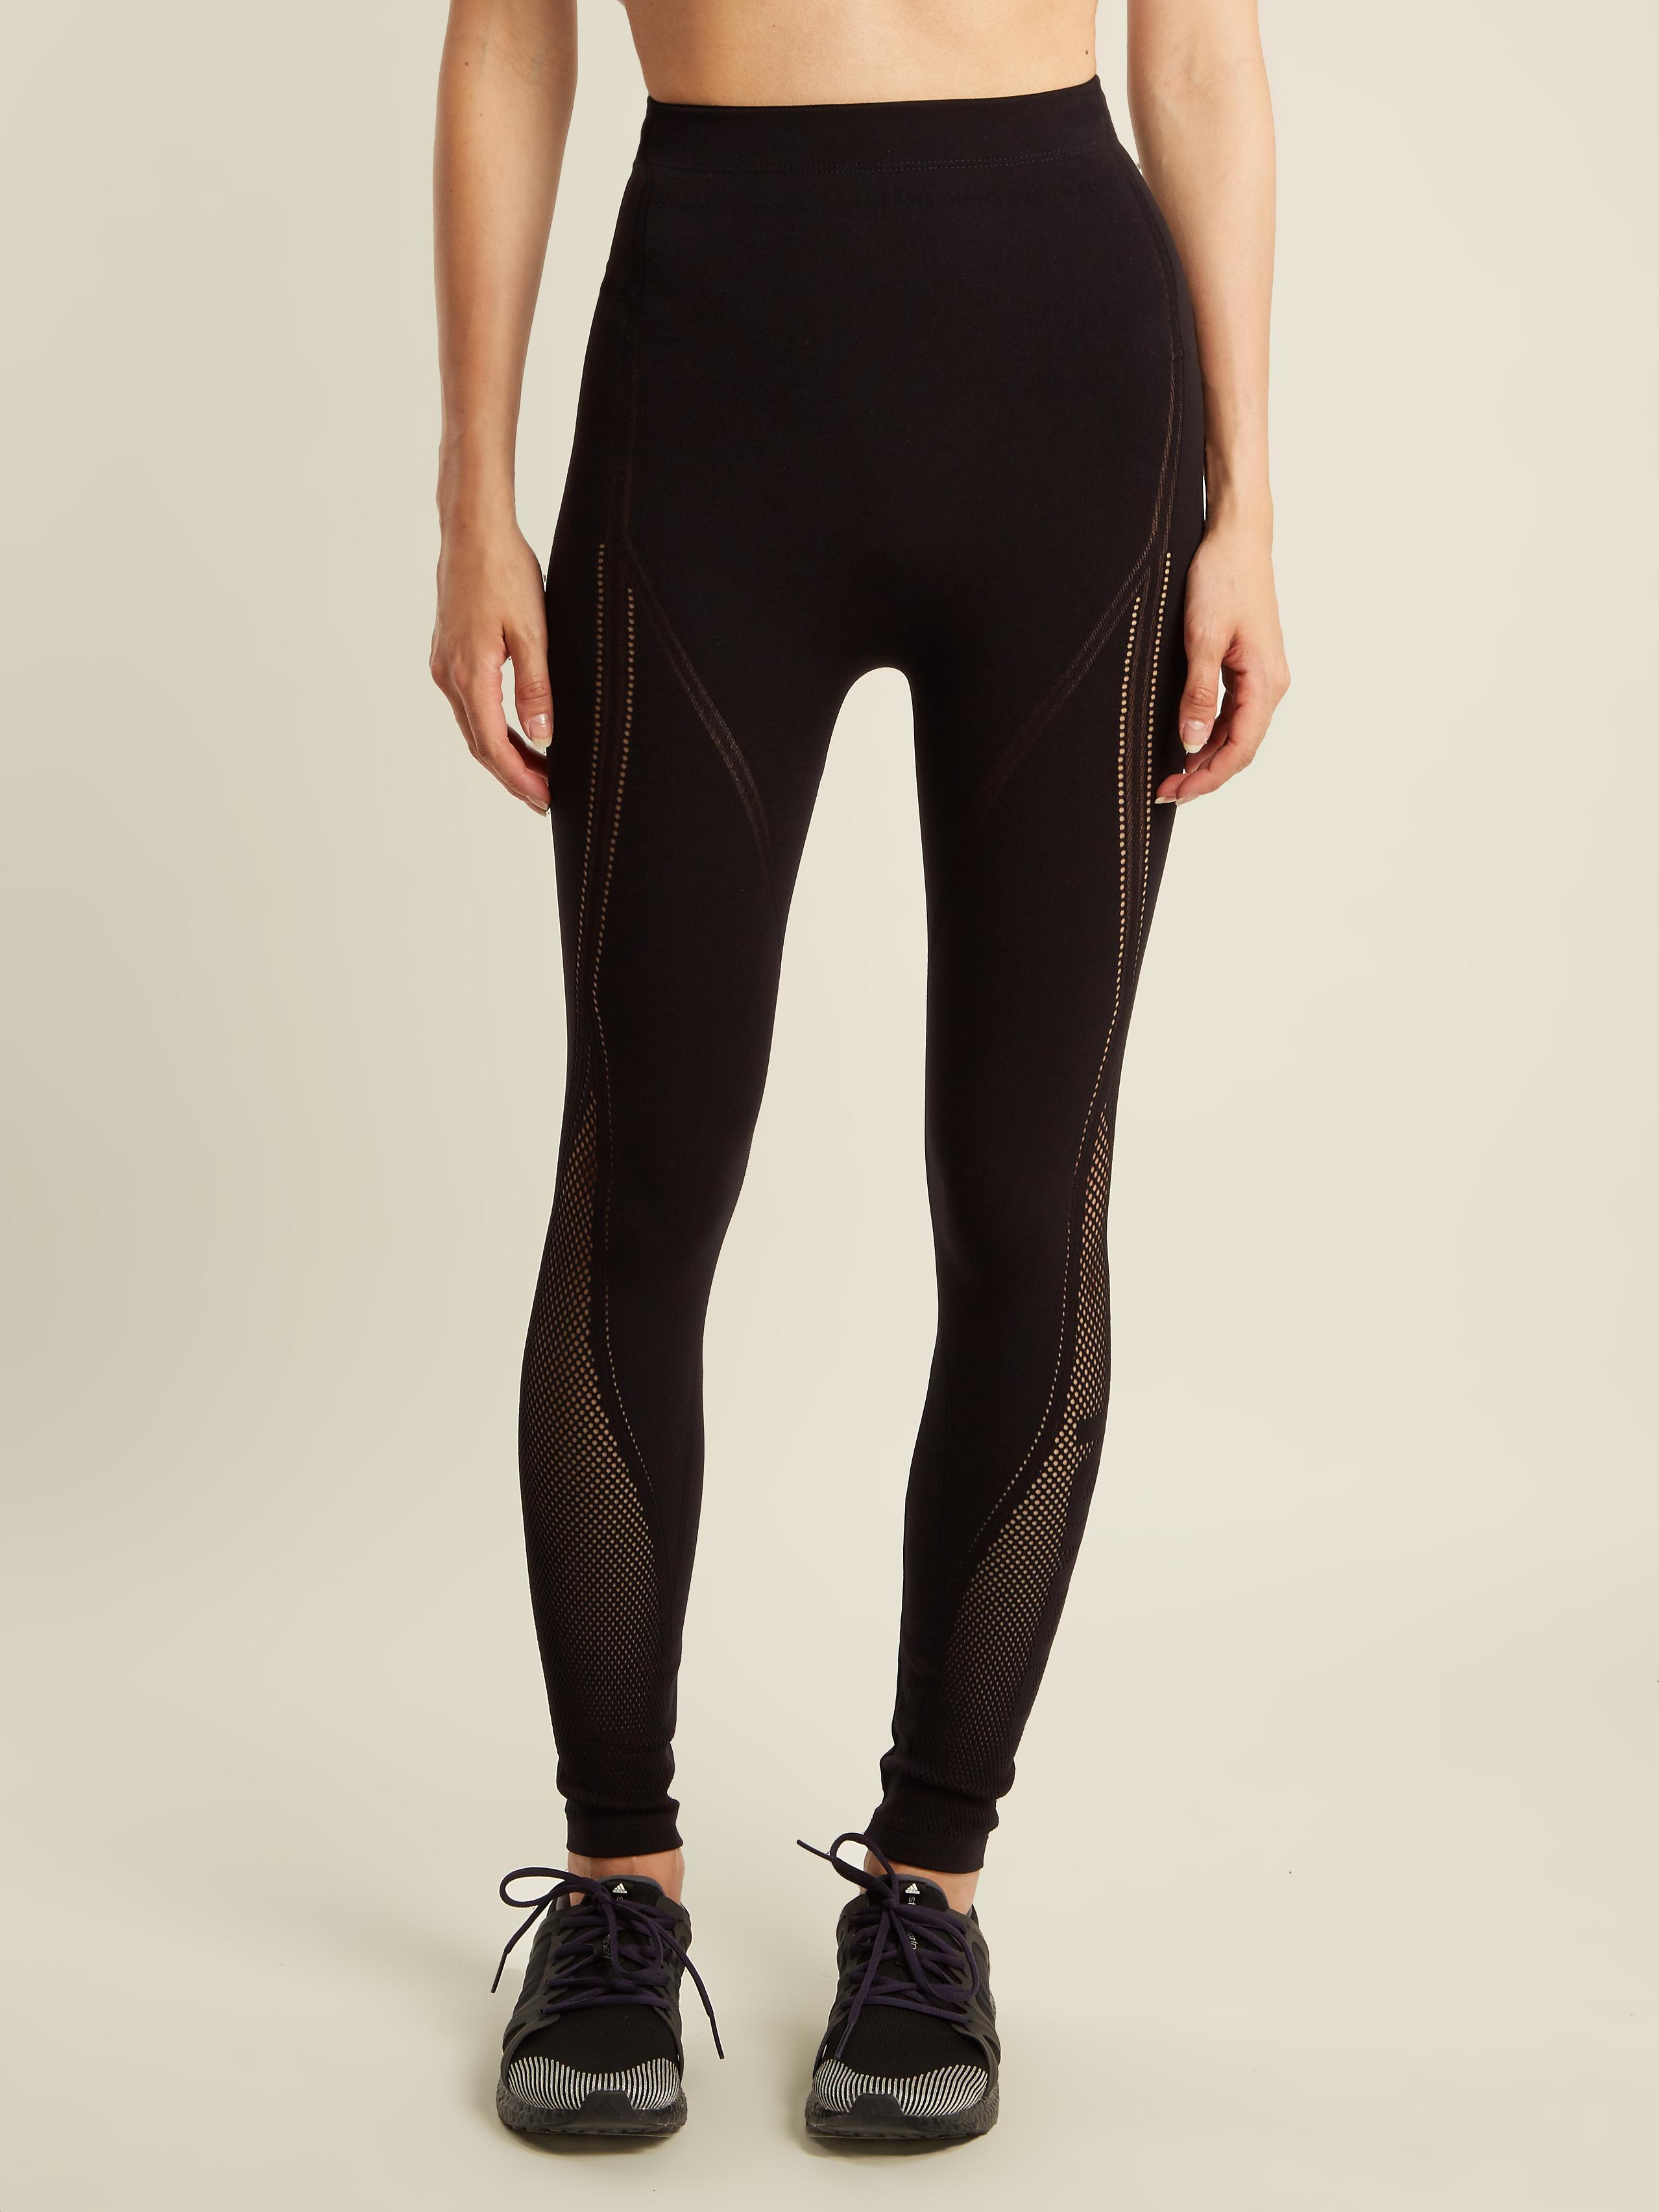 Black Thermal Leggings For Women  International Society of Precision  Agriculture